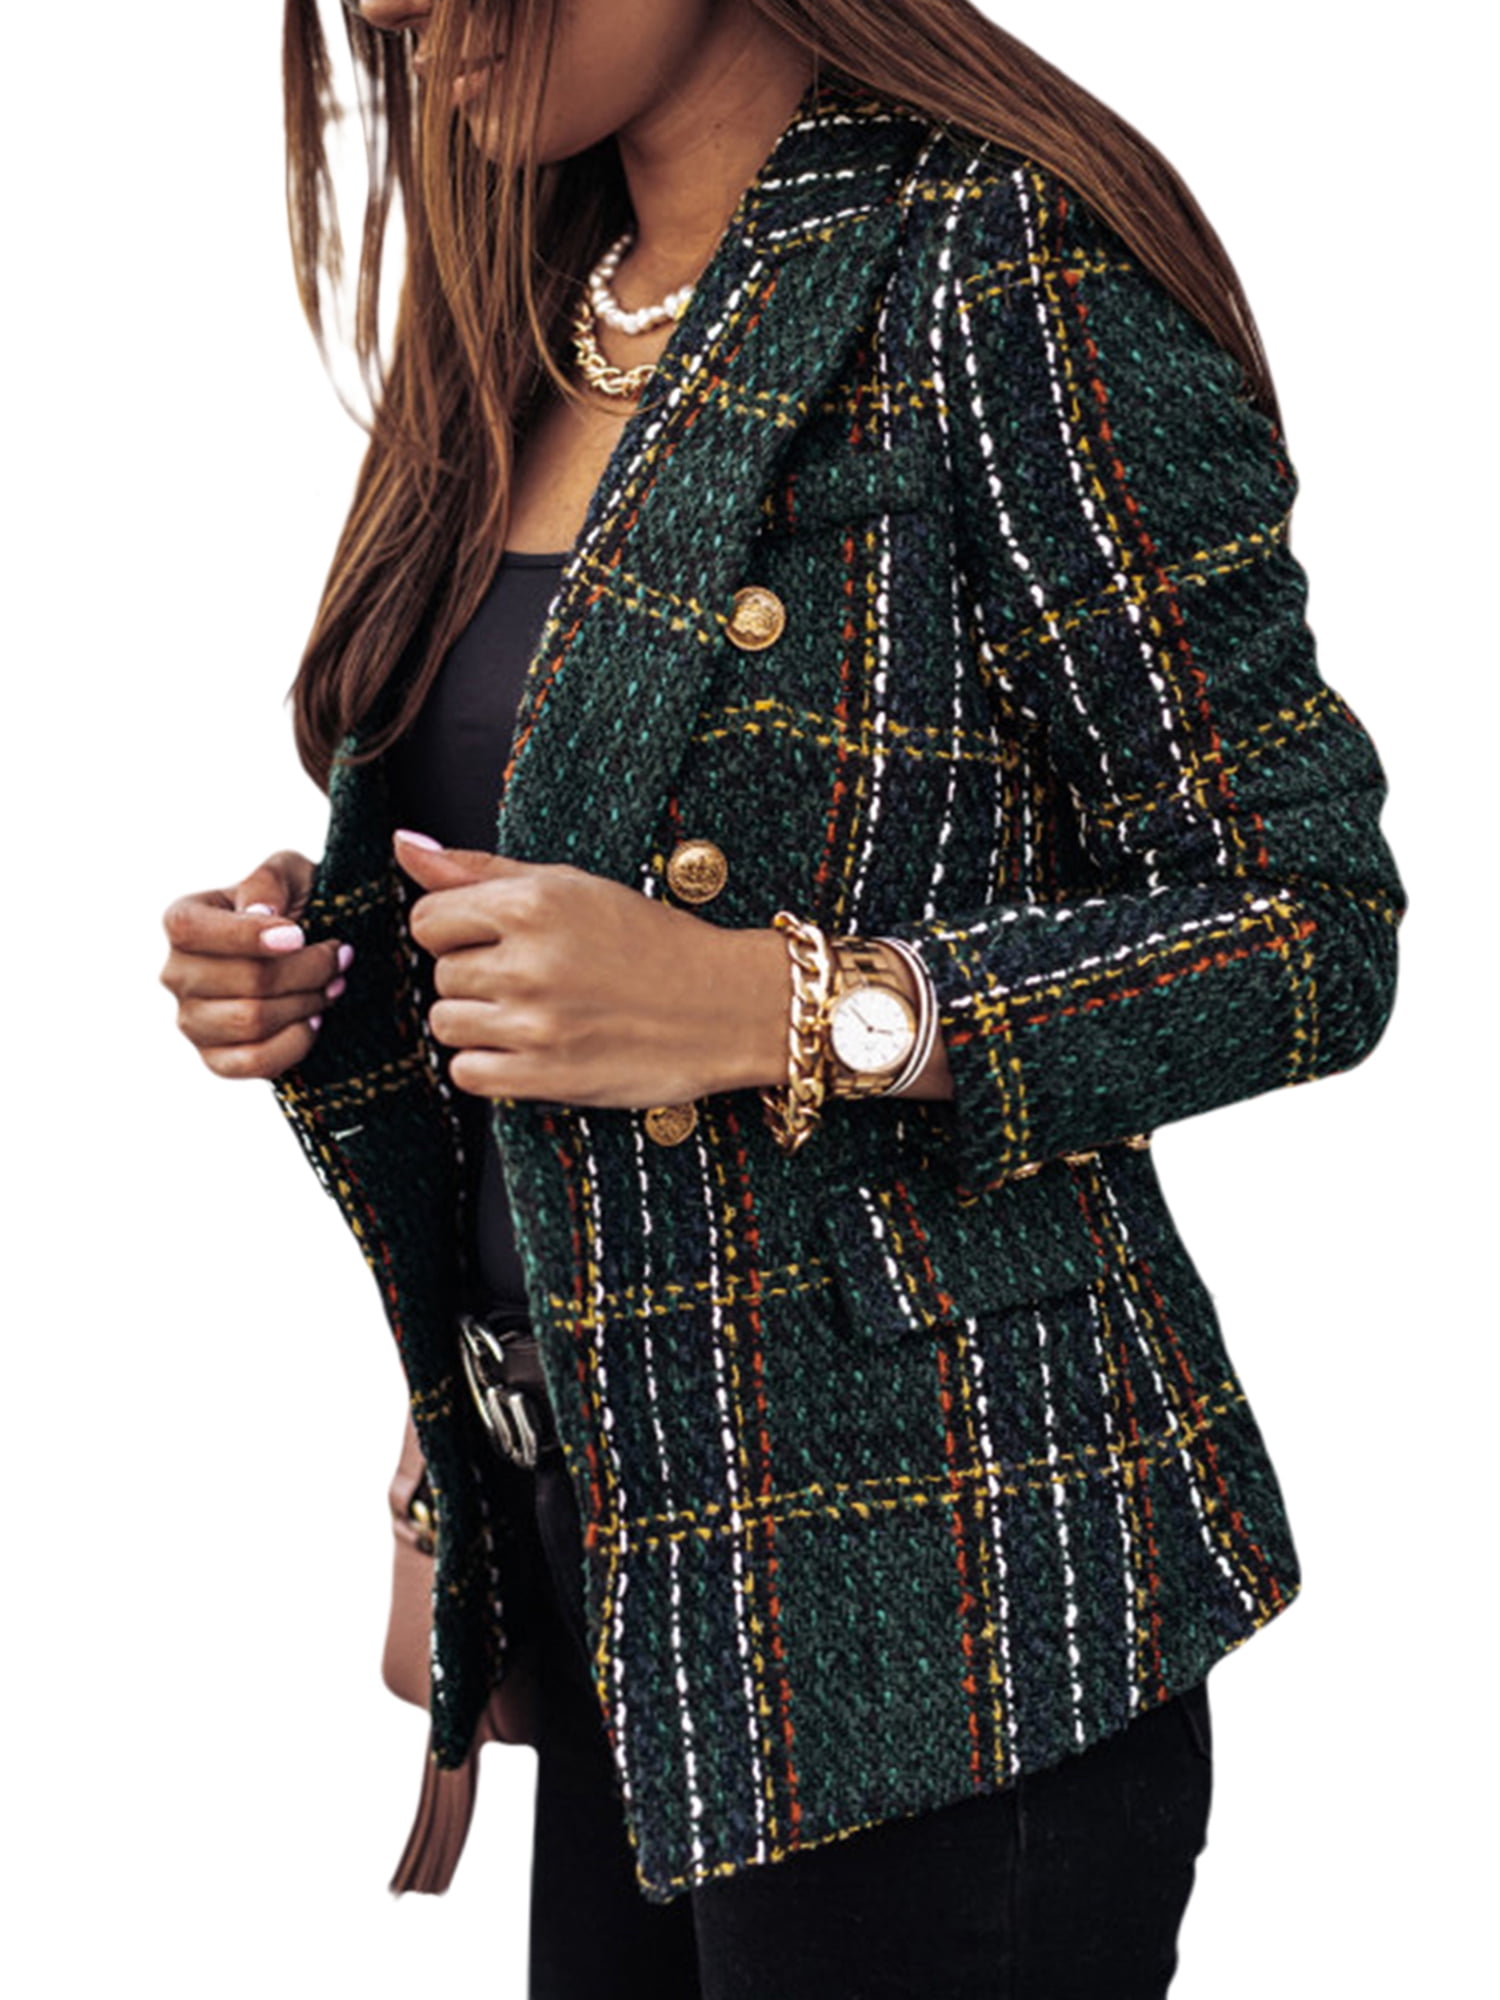 Long Sleeve Checkered Tailored Tartan Blazer Suits Woolen Buttoned Outfits Overcoat for Work Office Formal BURFLY Womens Retro Plaid Jacket Coat Winter Warm Clothes